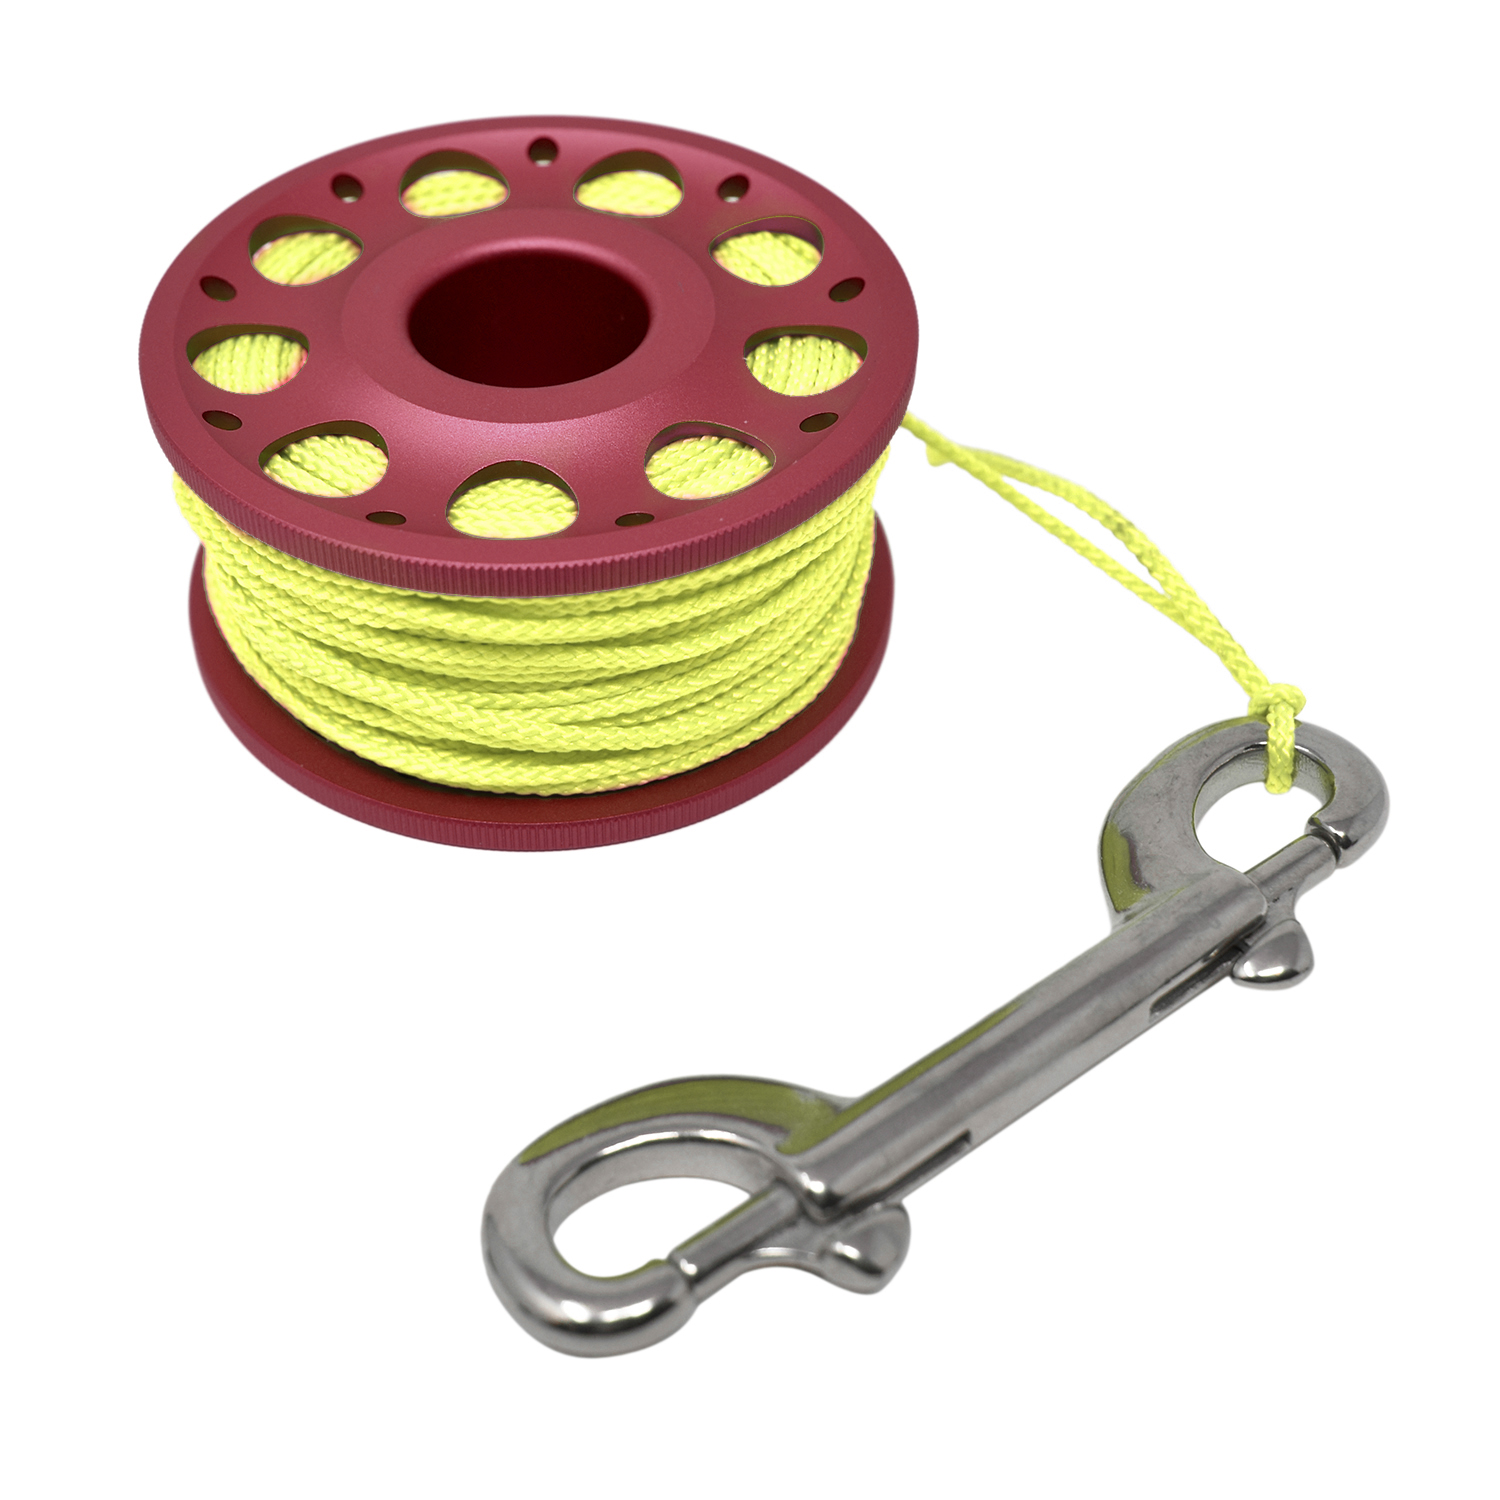 Aluminum Finger Spool 100ft Dive Reel w/ Retractable Holder, Red/Yellow - image 3 of 4